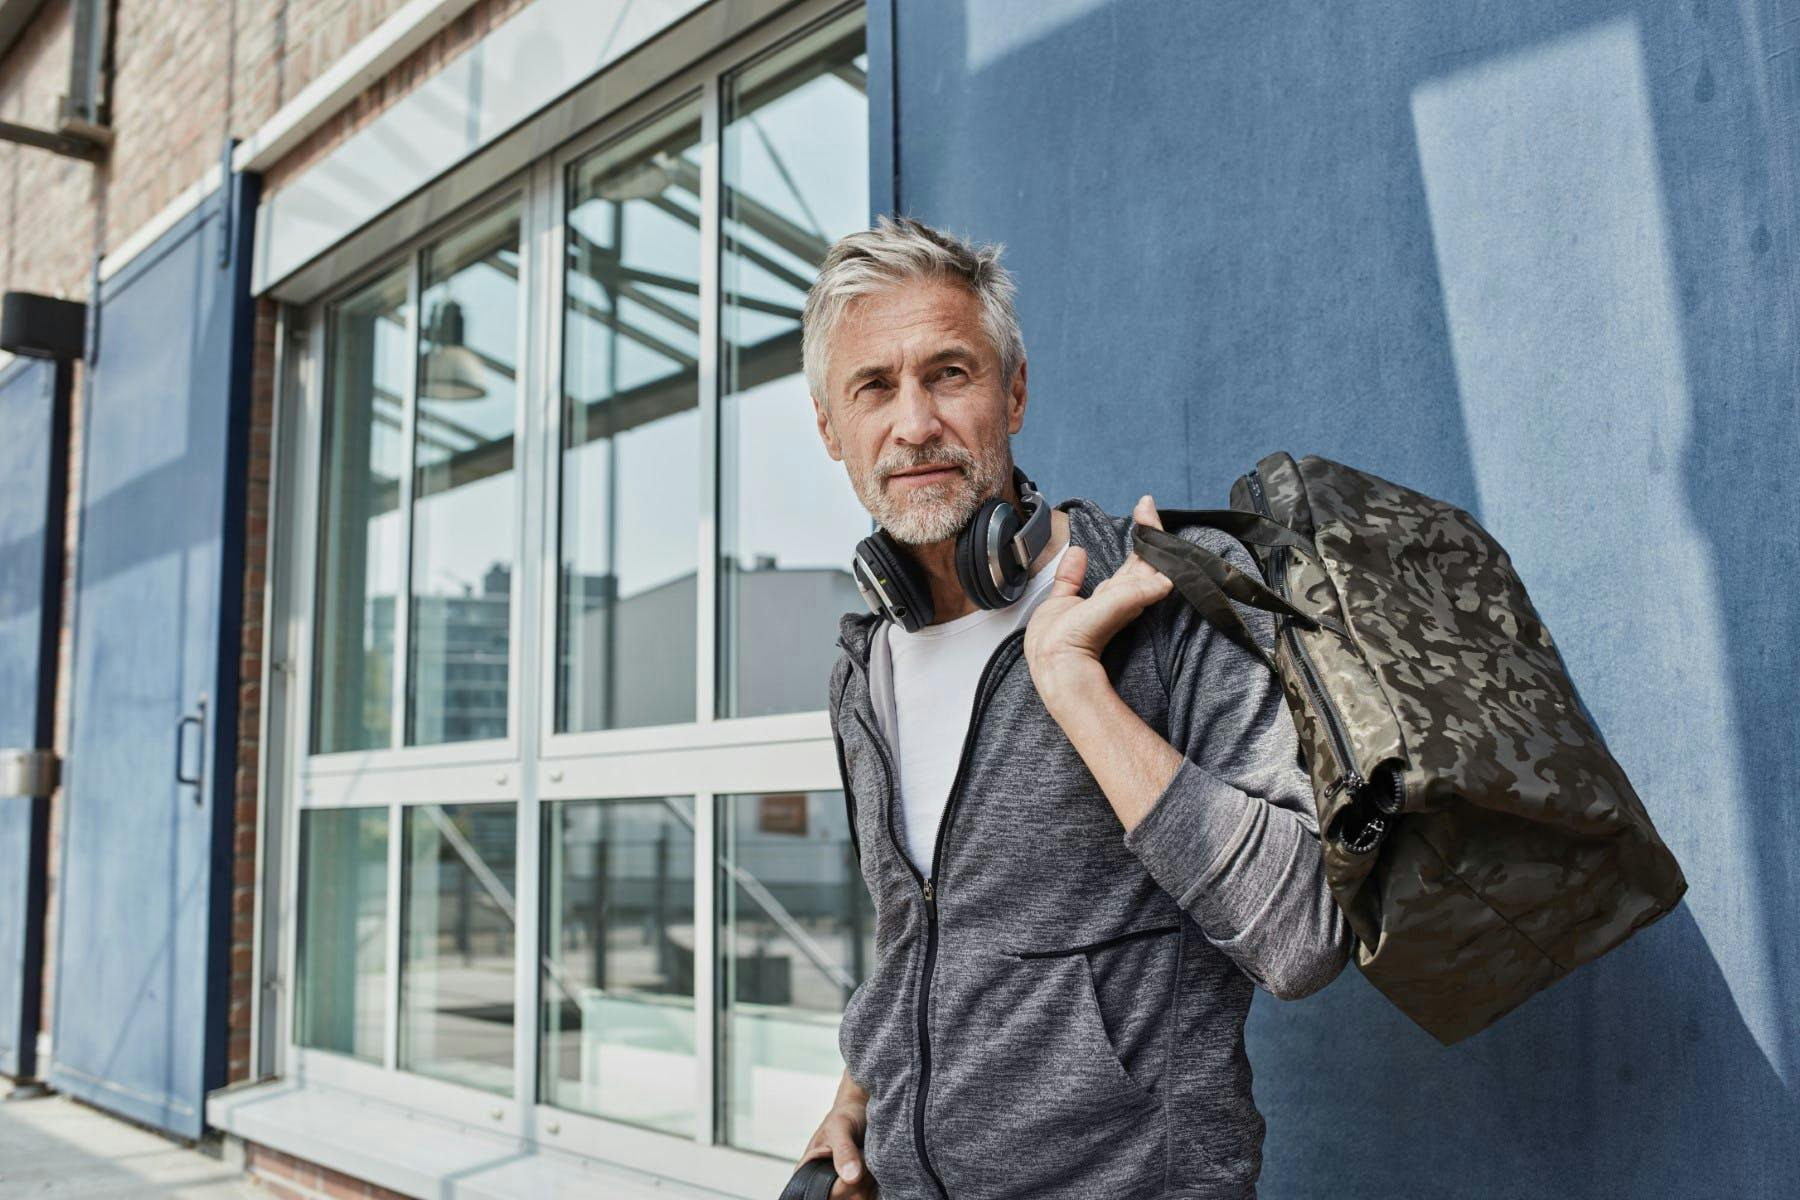 headphones portrait man gym sports bag camouflage adults people fitness sport workout best ager healthy lifestyle fashionable active on shoulders men's fashion mature men one person 55-60 years caucasian grey hair beard sportive healthy exercising fit leisure motivation training building outdoors day waist up patterned sportswear activity tracksuit top health awareness lifestyle germany health fashion 50-60 years mature adults built structure pattern tracksuit photography color image person adult male electronics bag handbag accessories